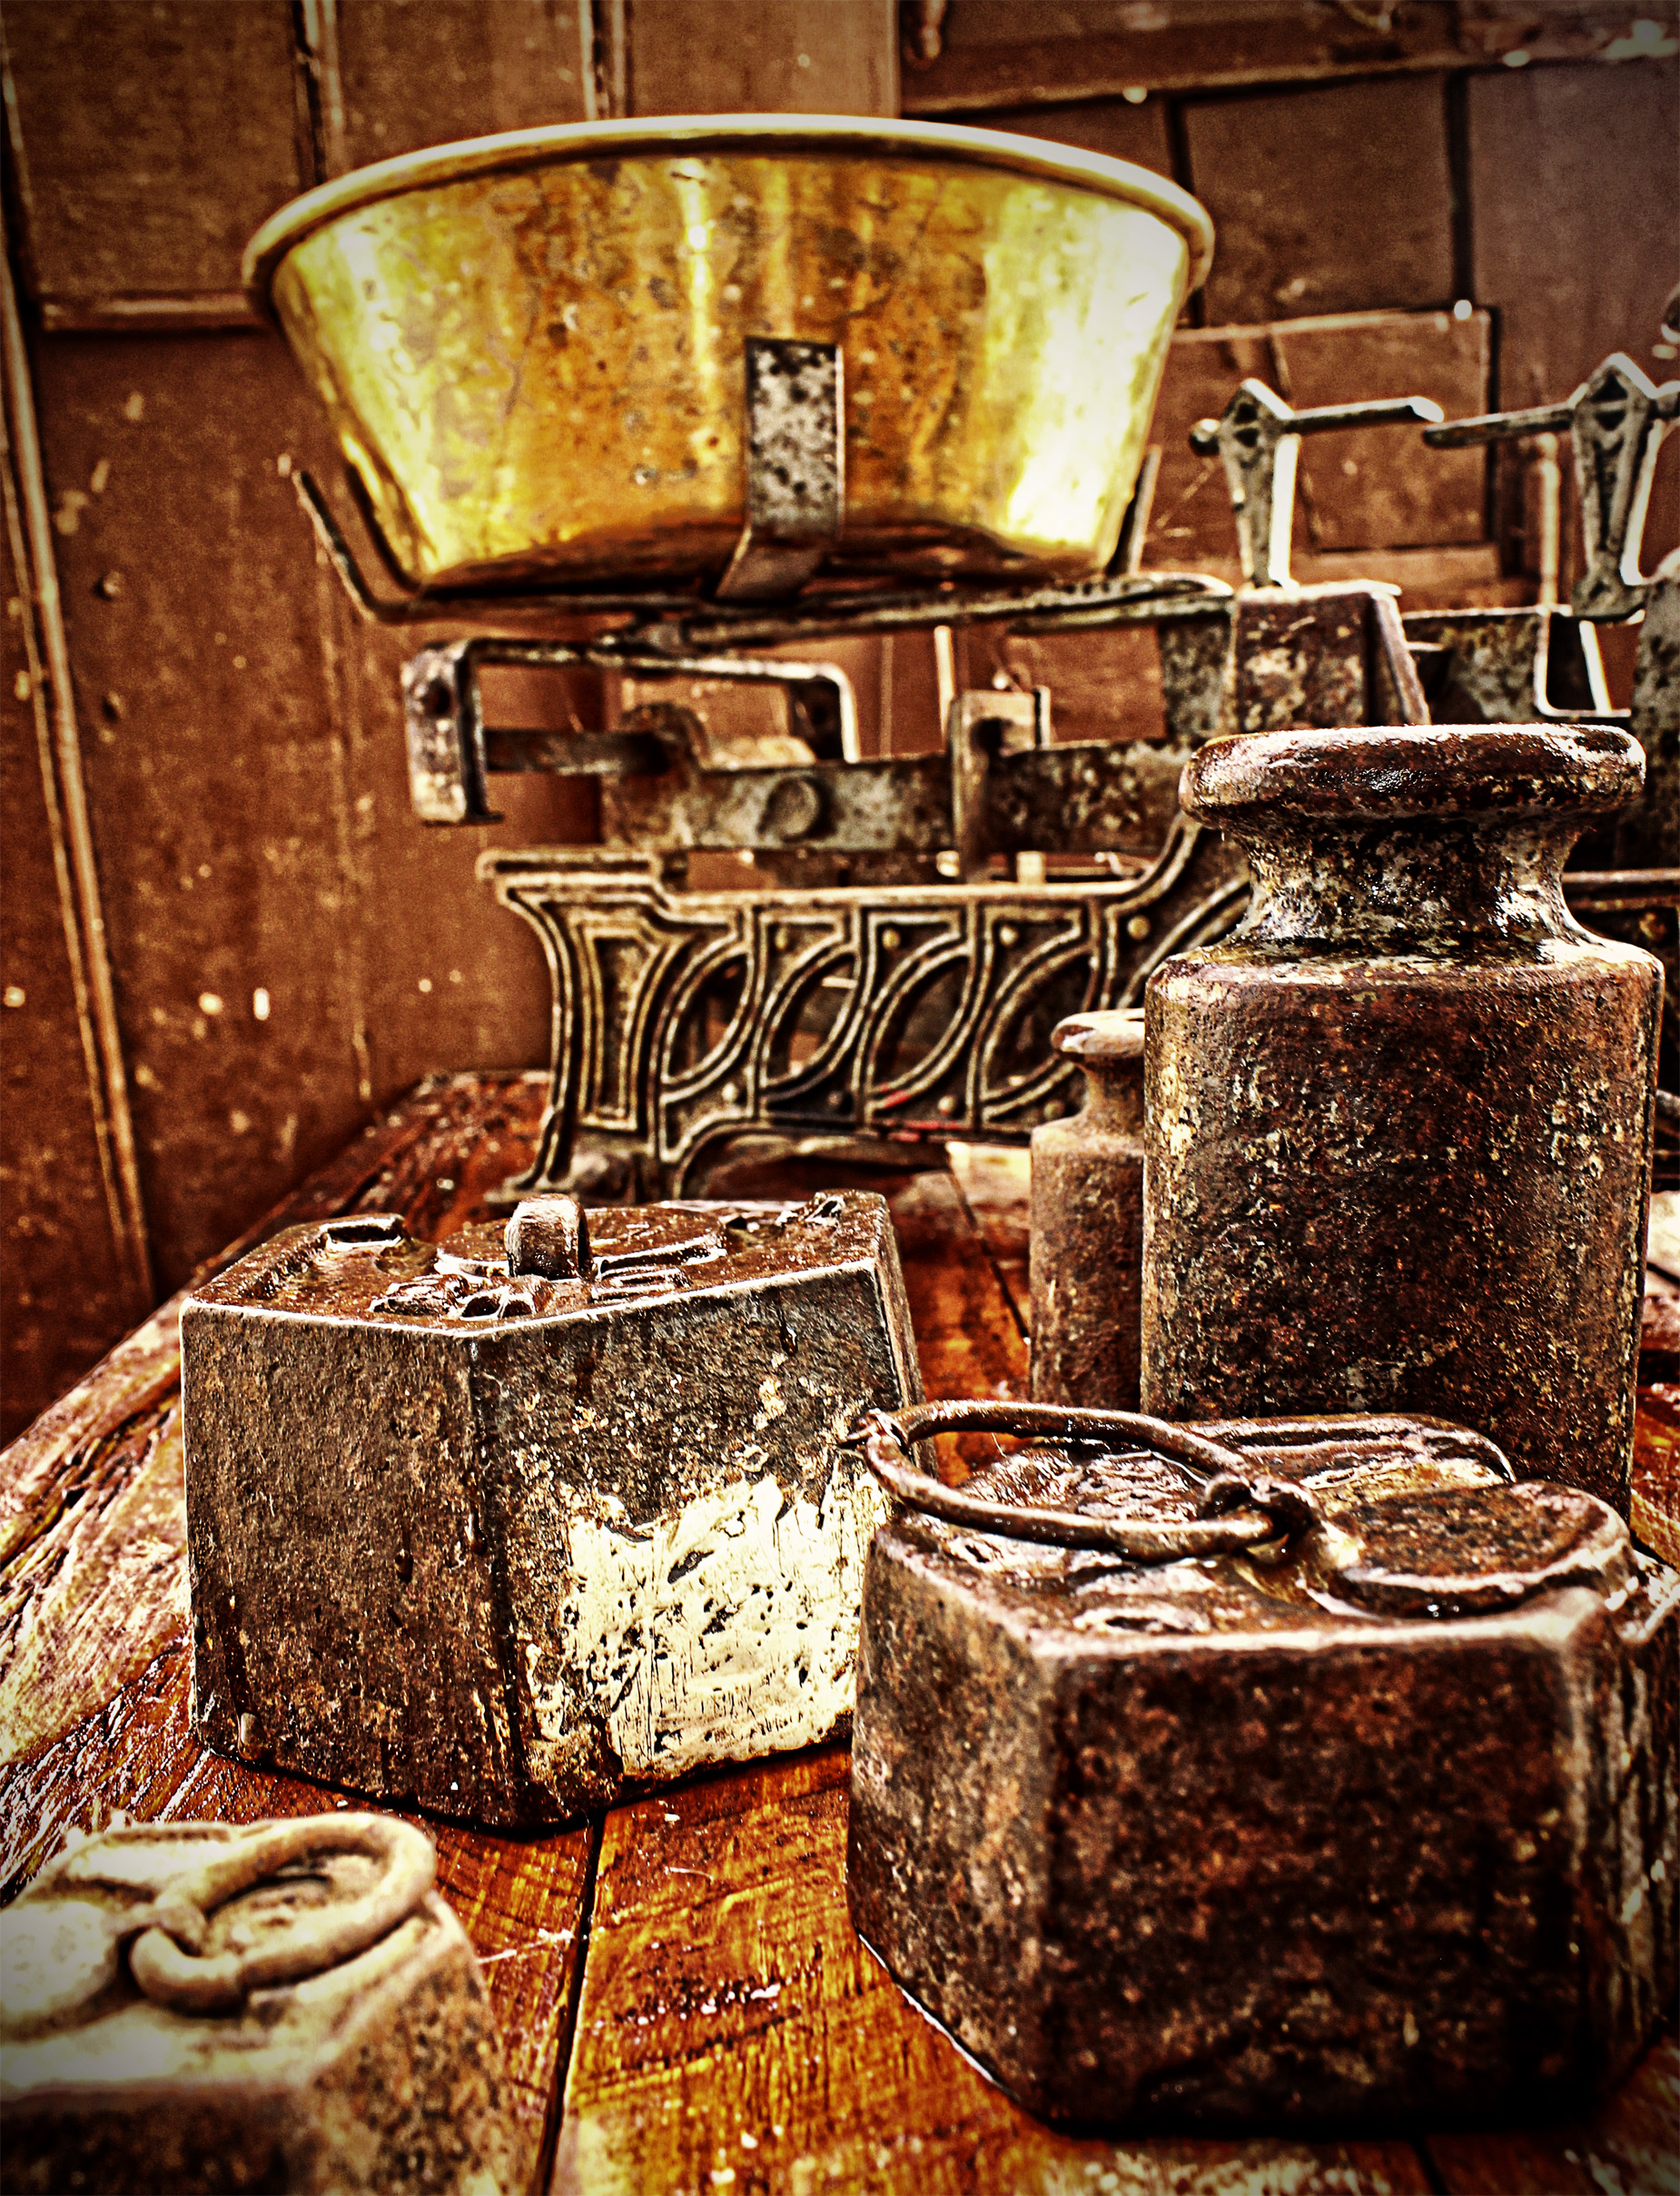 Old rusty scales and weights - grunge looks photo